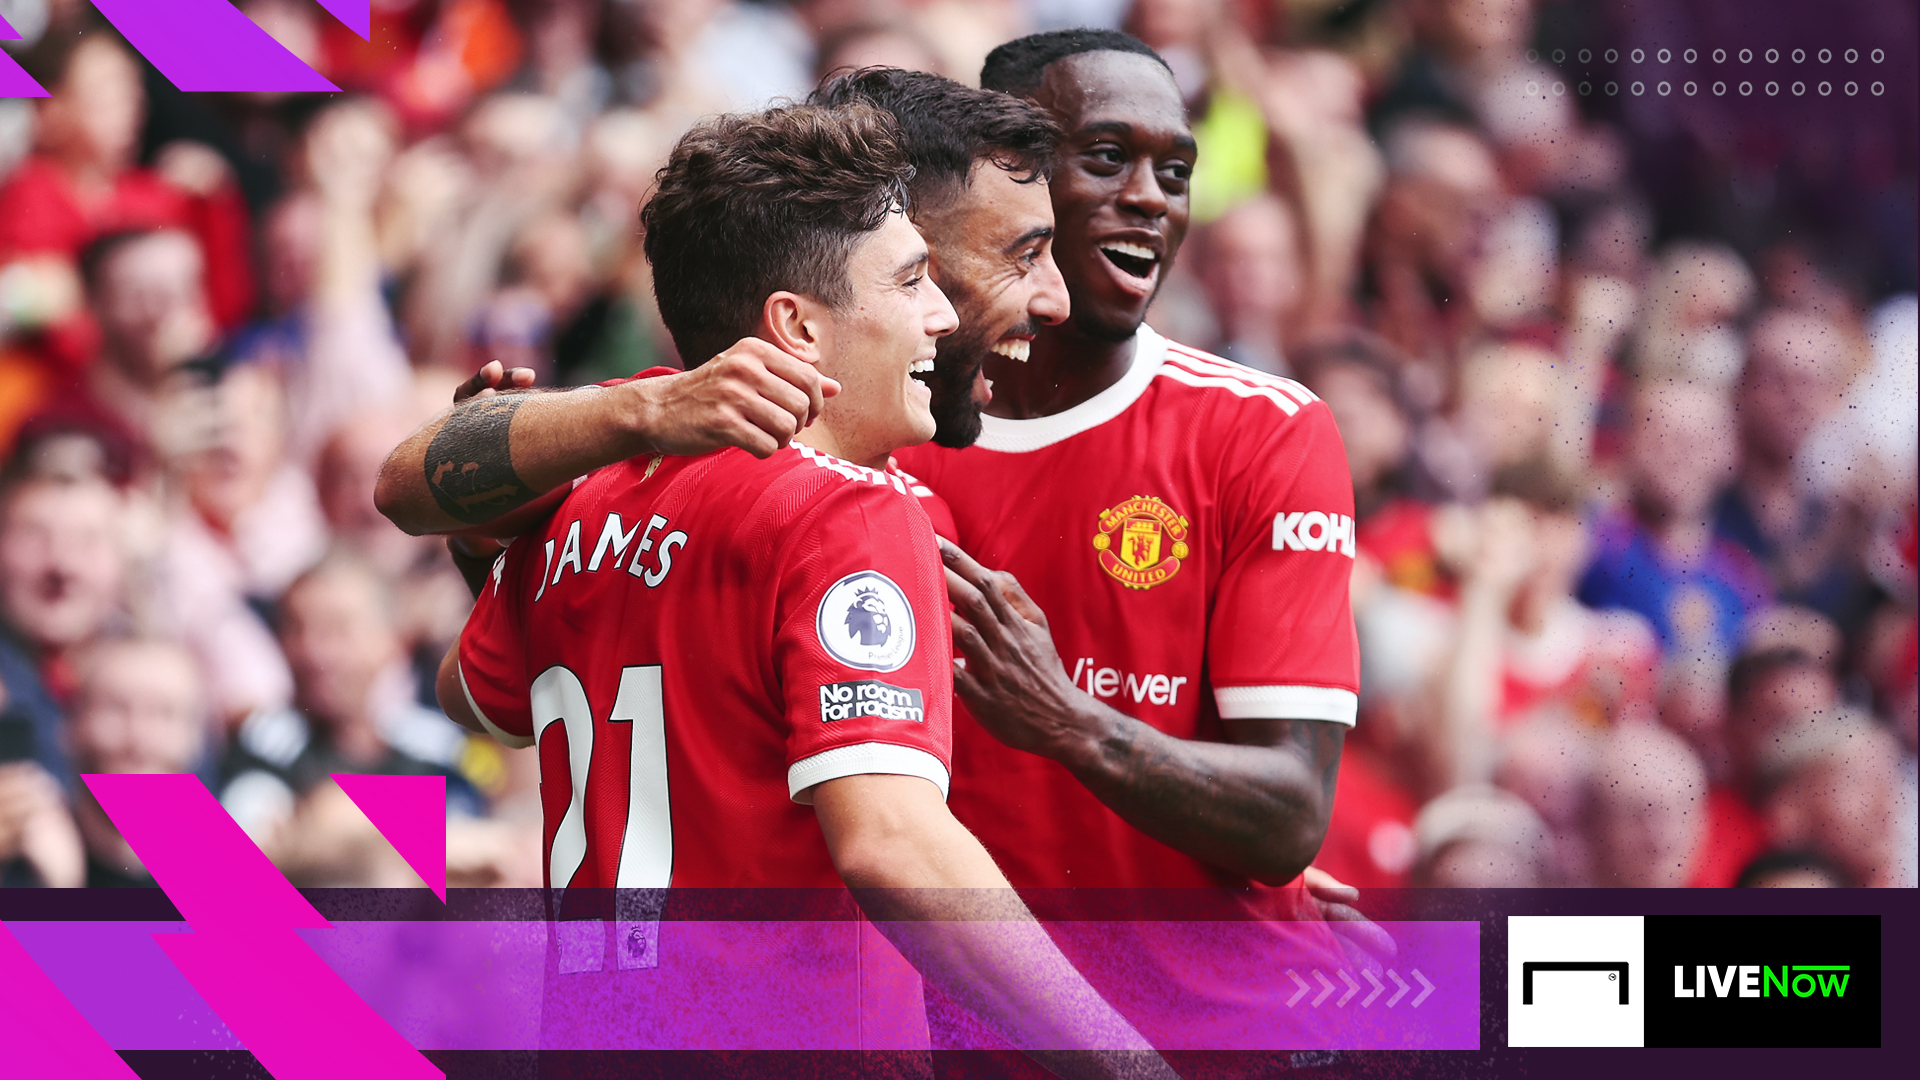 Watch Wolves v Man United with LIVENow